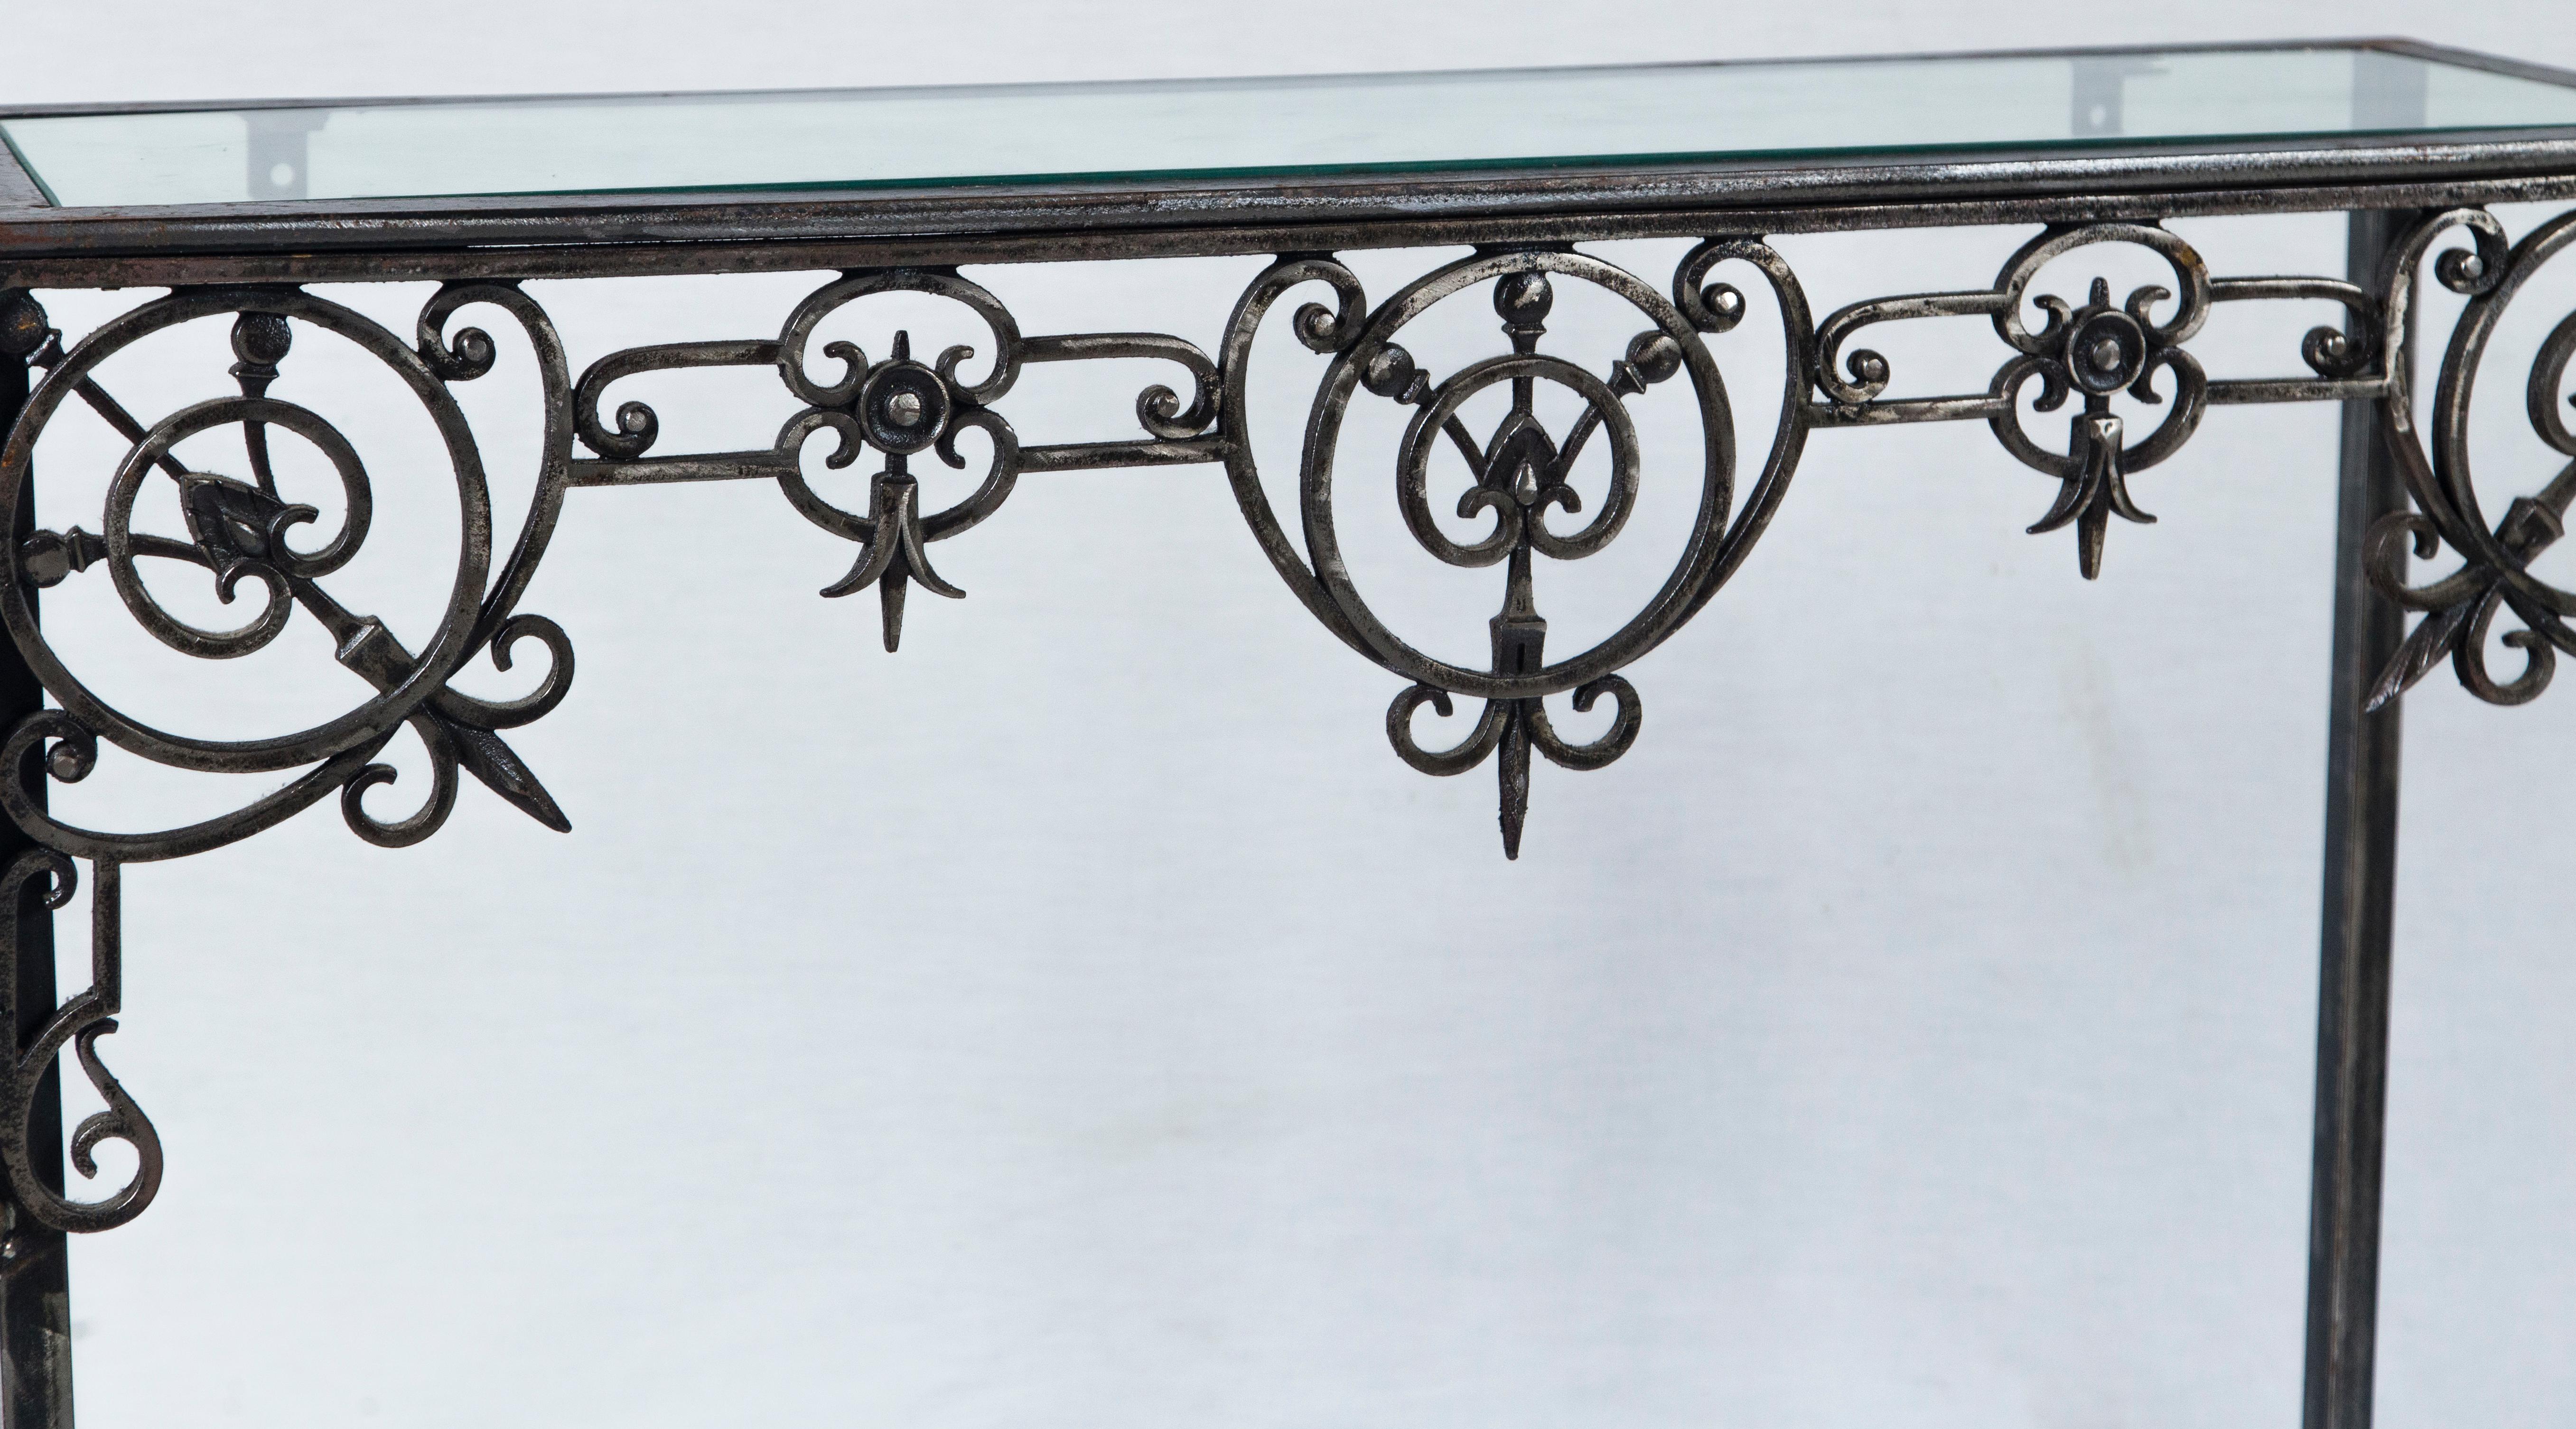 Antique architectural iron custom console table, France. Table was designed around an intricate piece of architectural ornament from the late 19th century. Top and lower glass shelves.